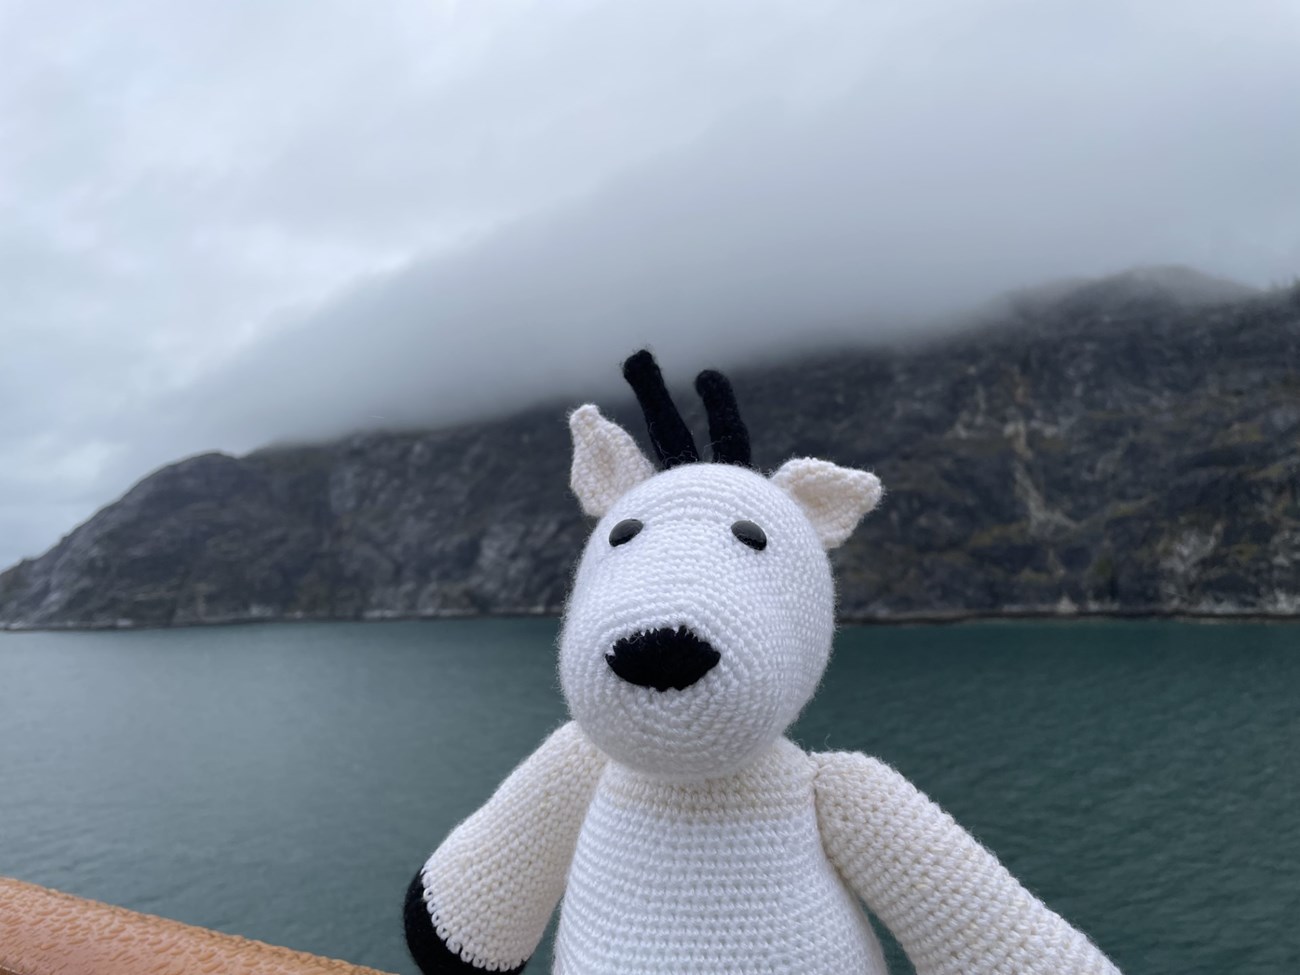 Mountain goat made out of yarn in front of a rocky background